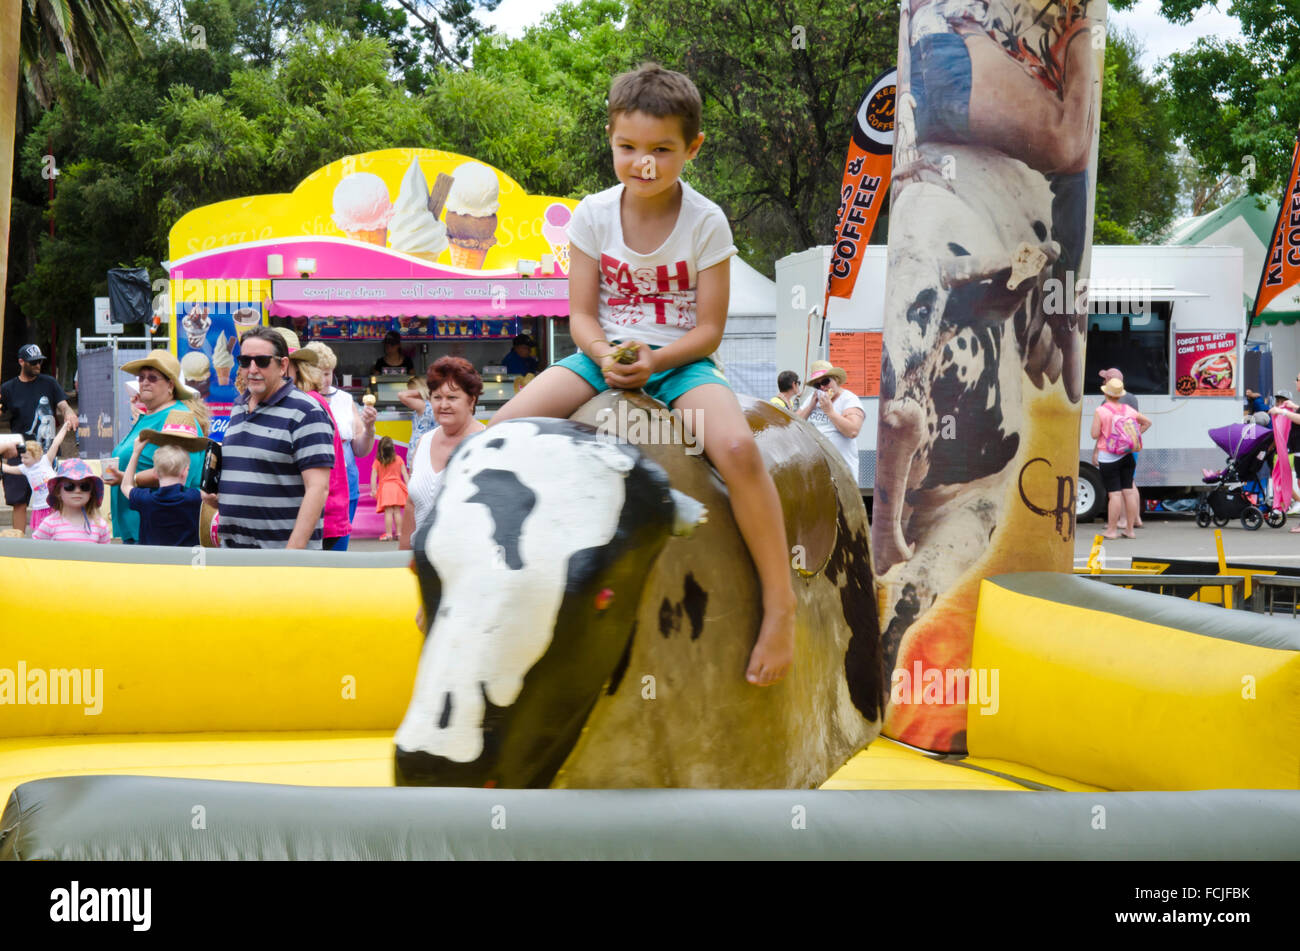 Young boy riding a mechanical bull Stock Photo